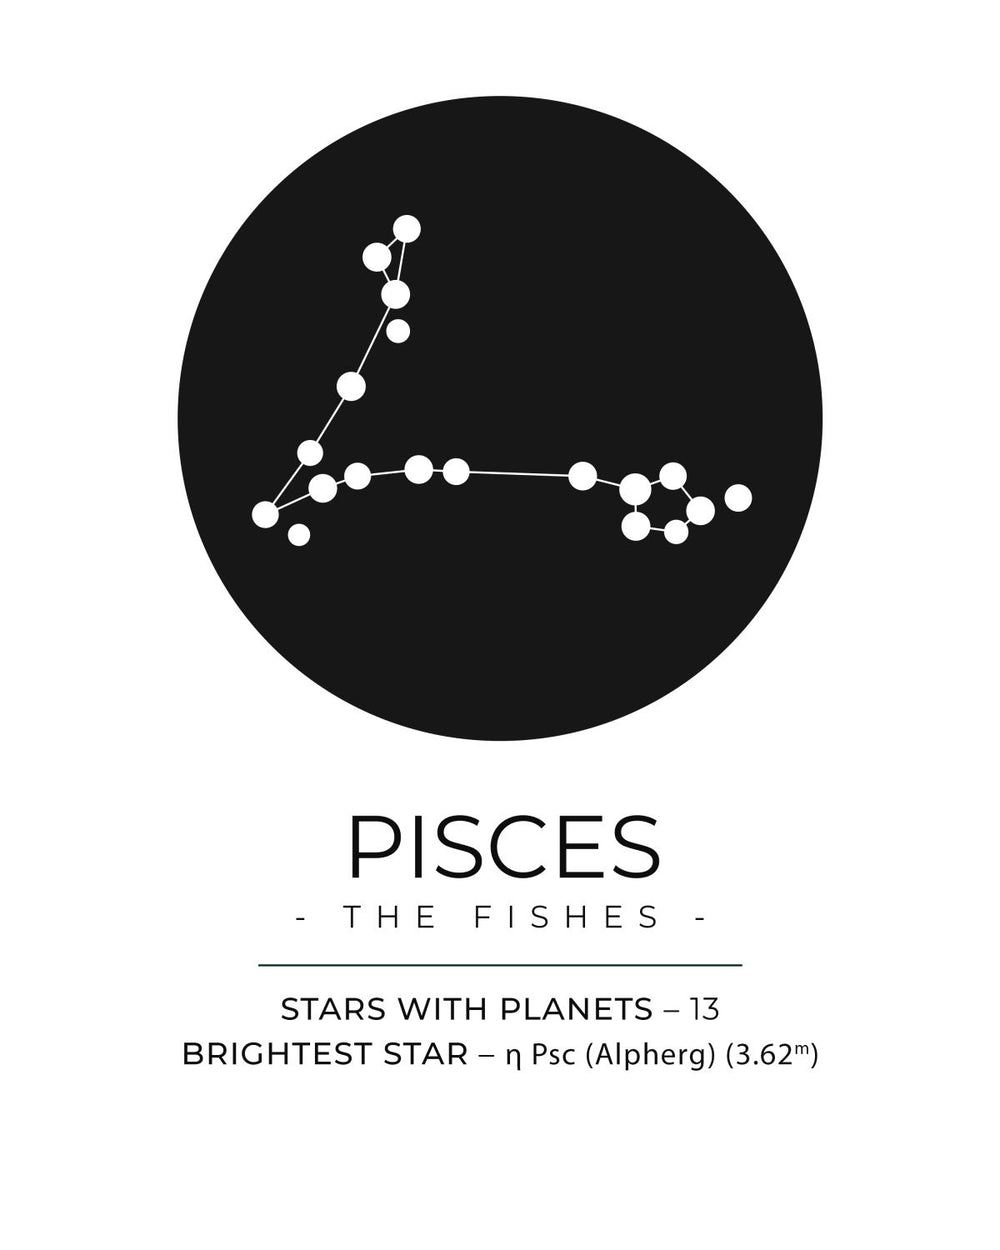 The Pisces Constellation